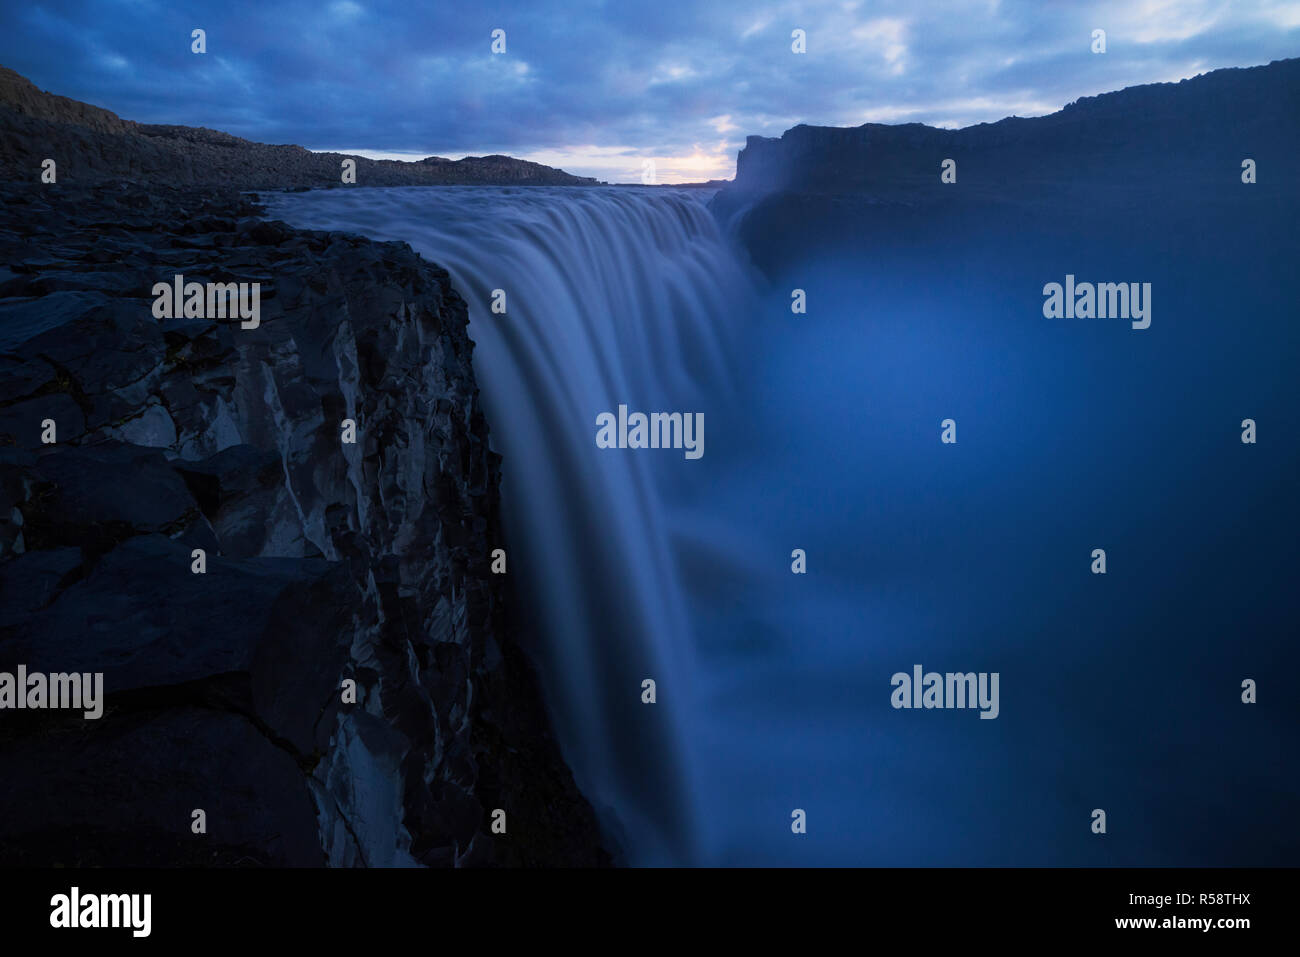 Moonset over roaring waterfall, Dettifoss, Iceland Stock Photo